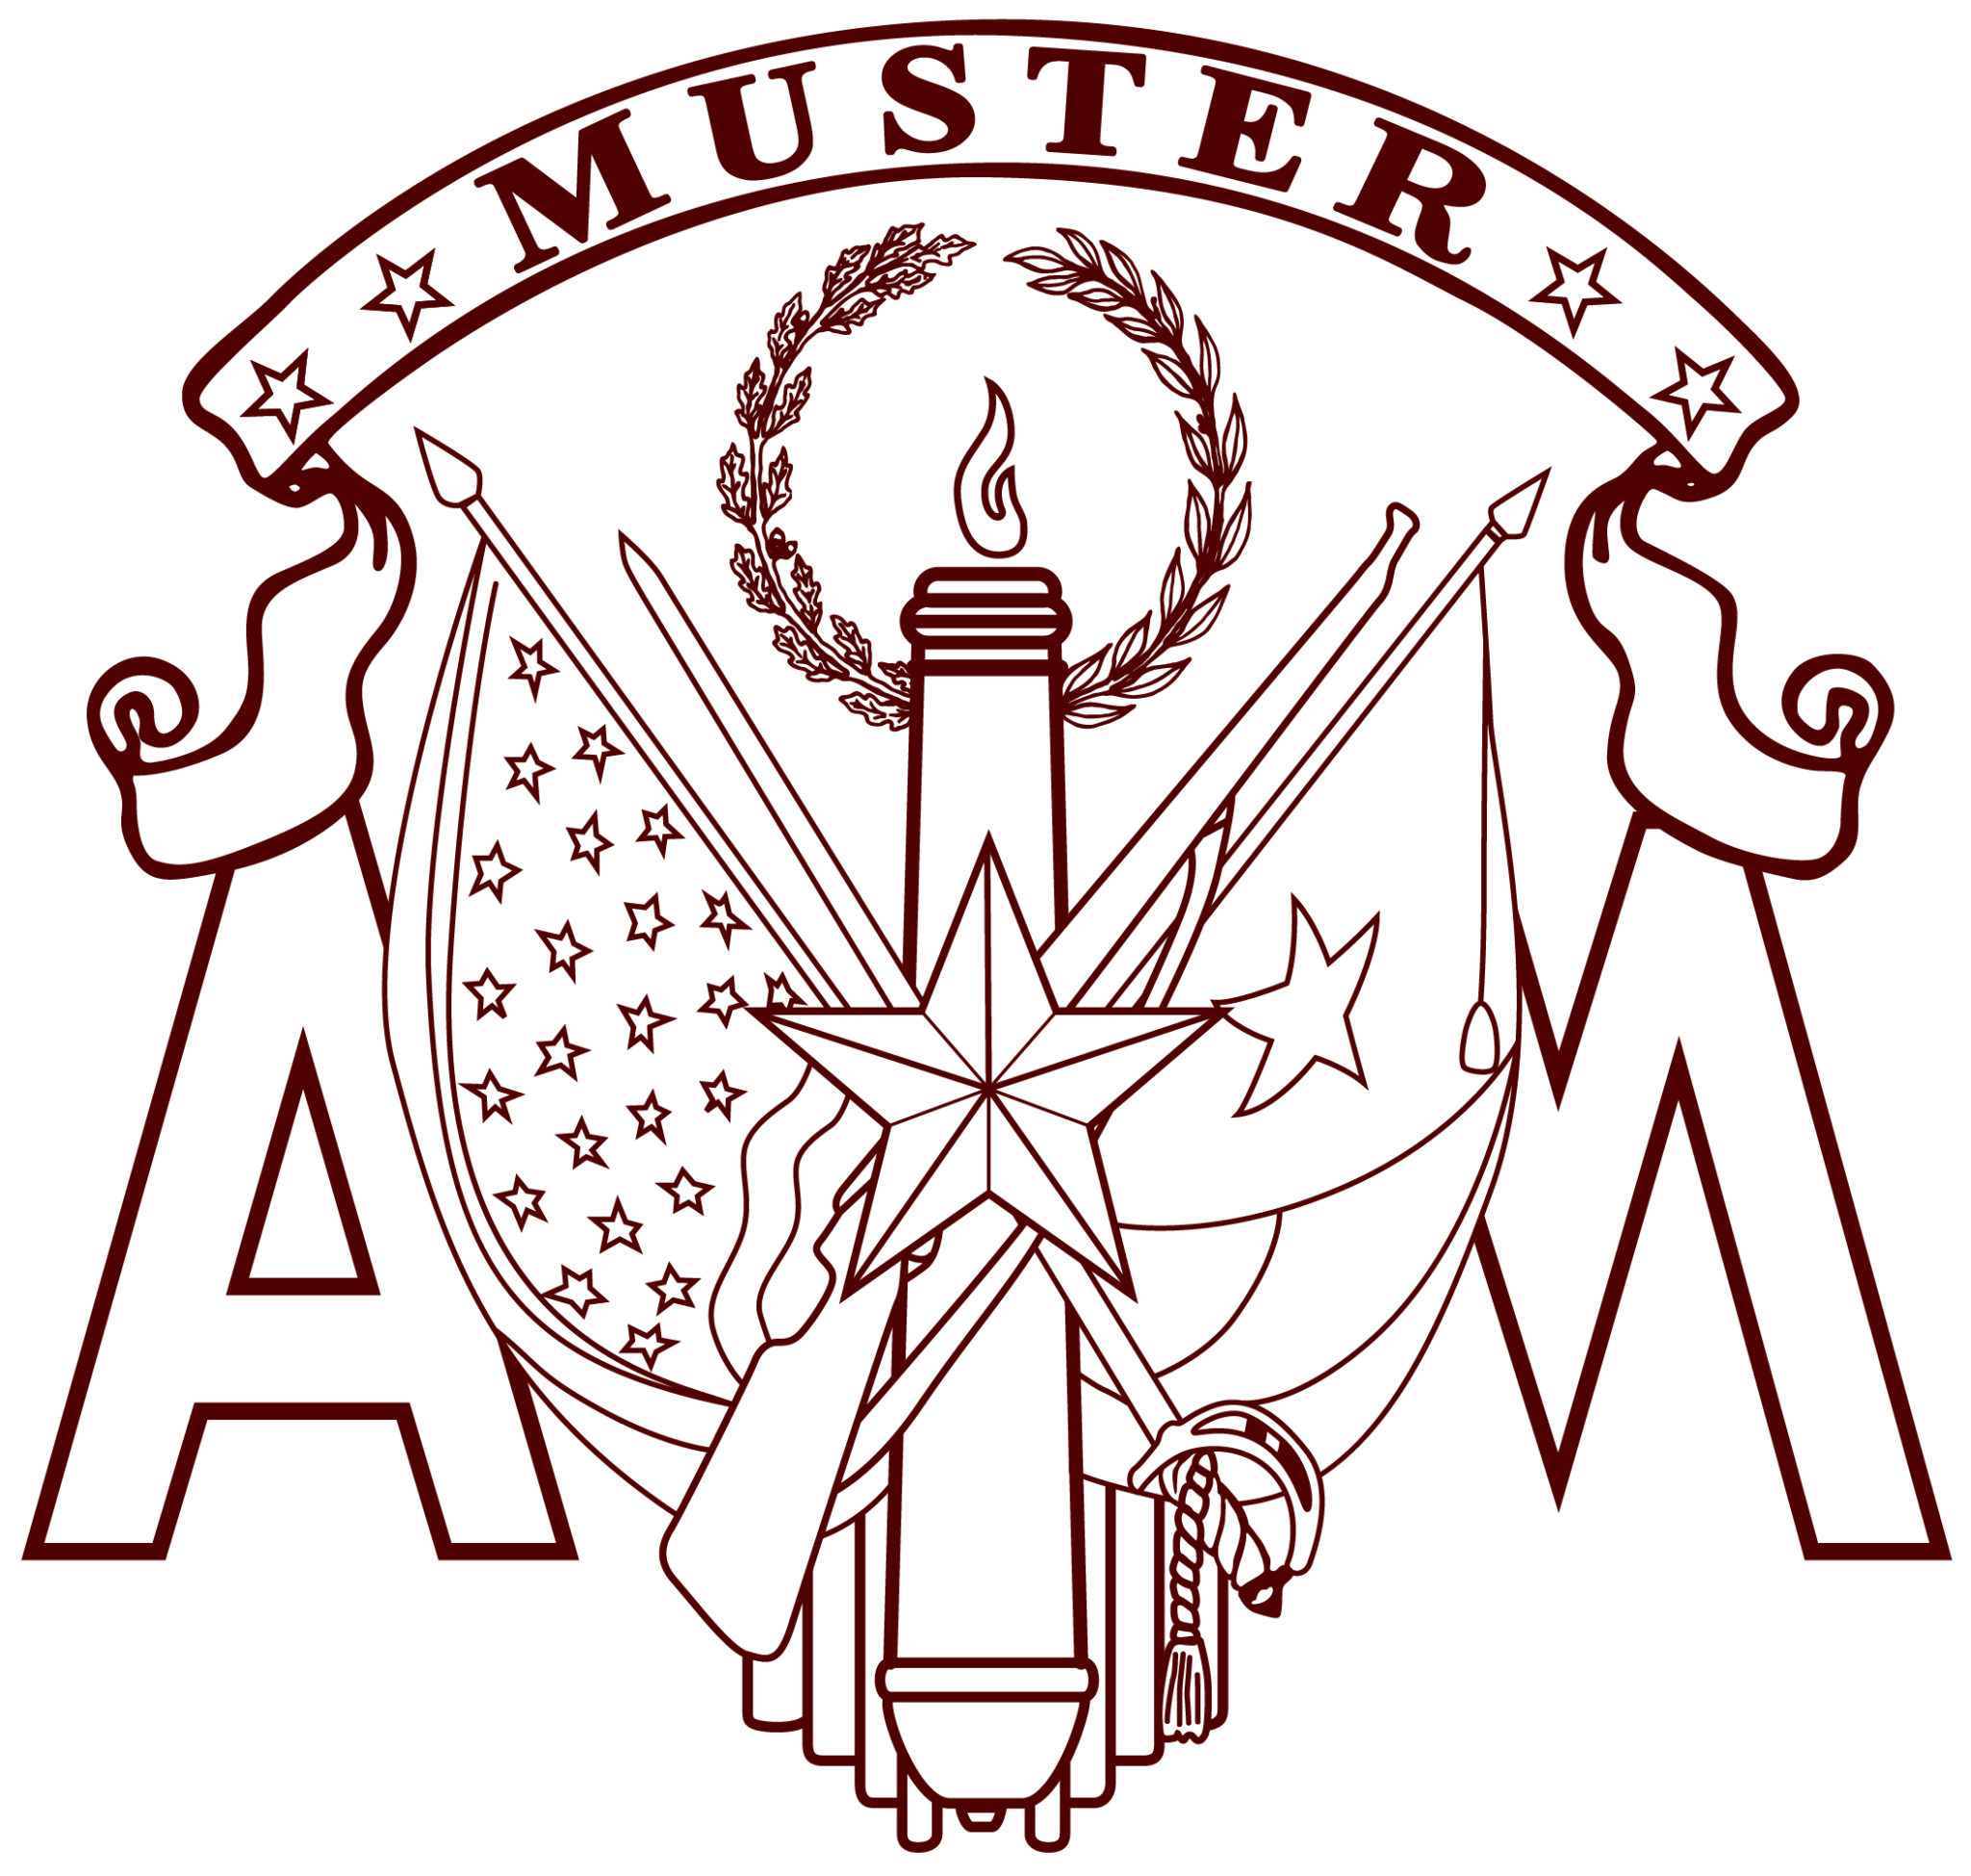 Aggie Muster 2023 Maryland A&M Club